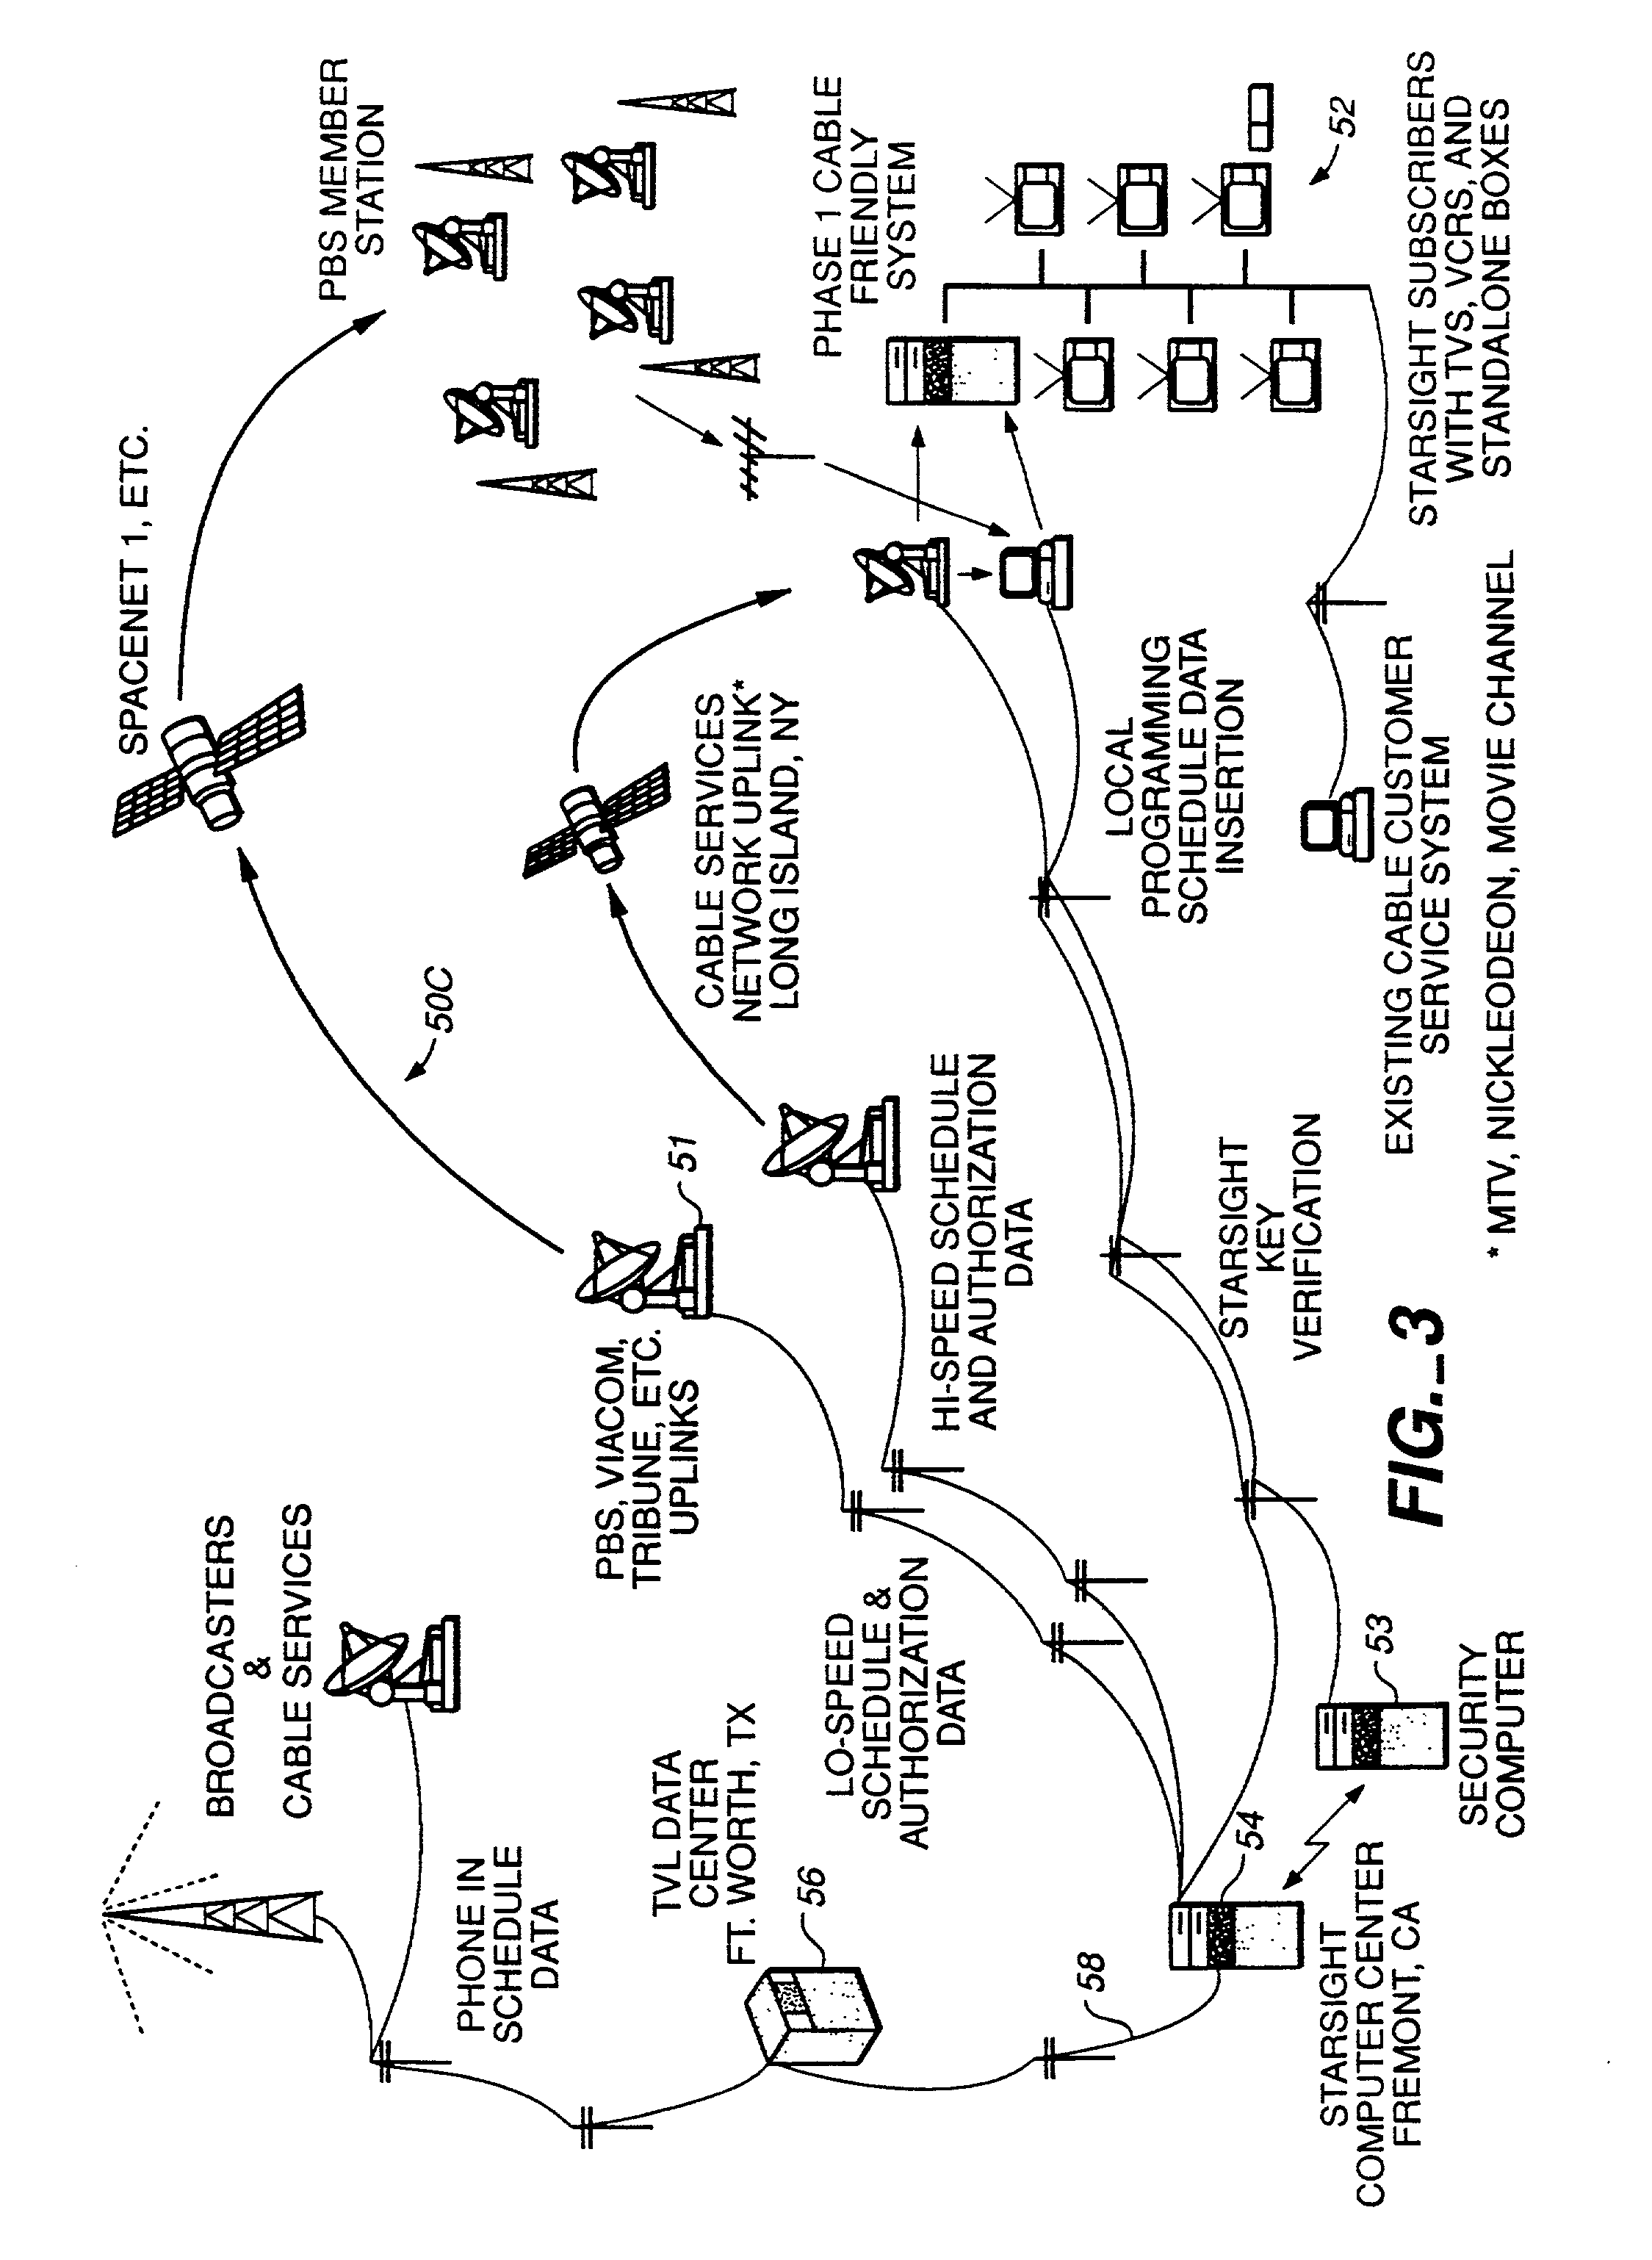 System and method for transmitting and utilizing electronic programs guide information